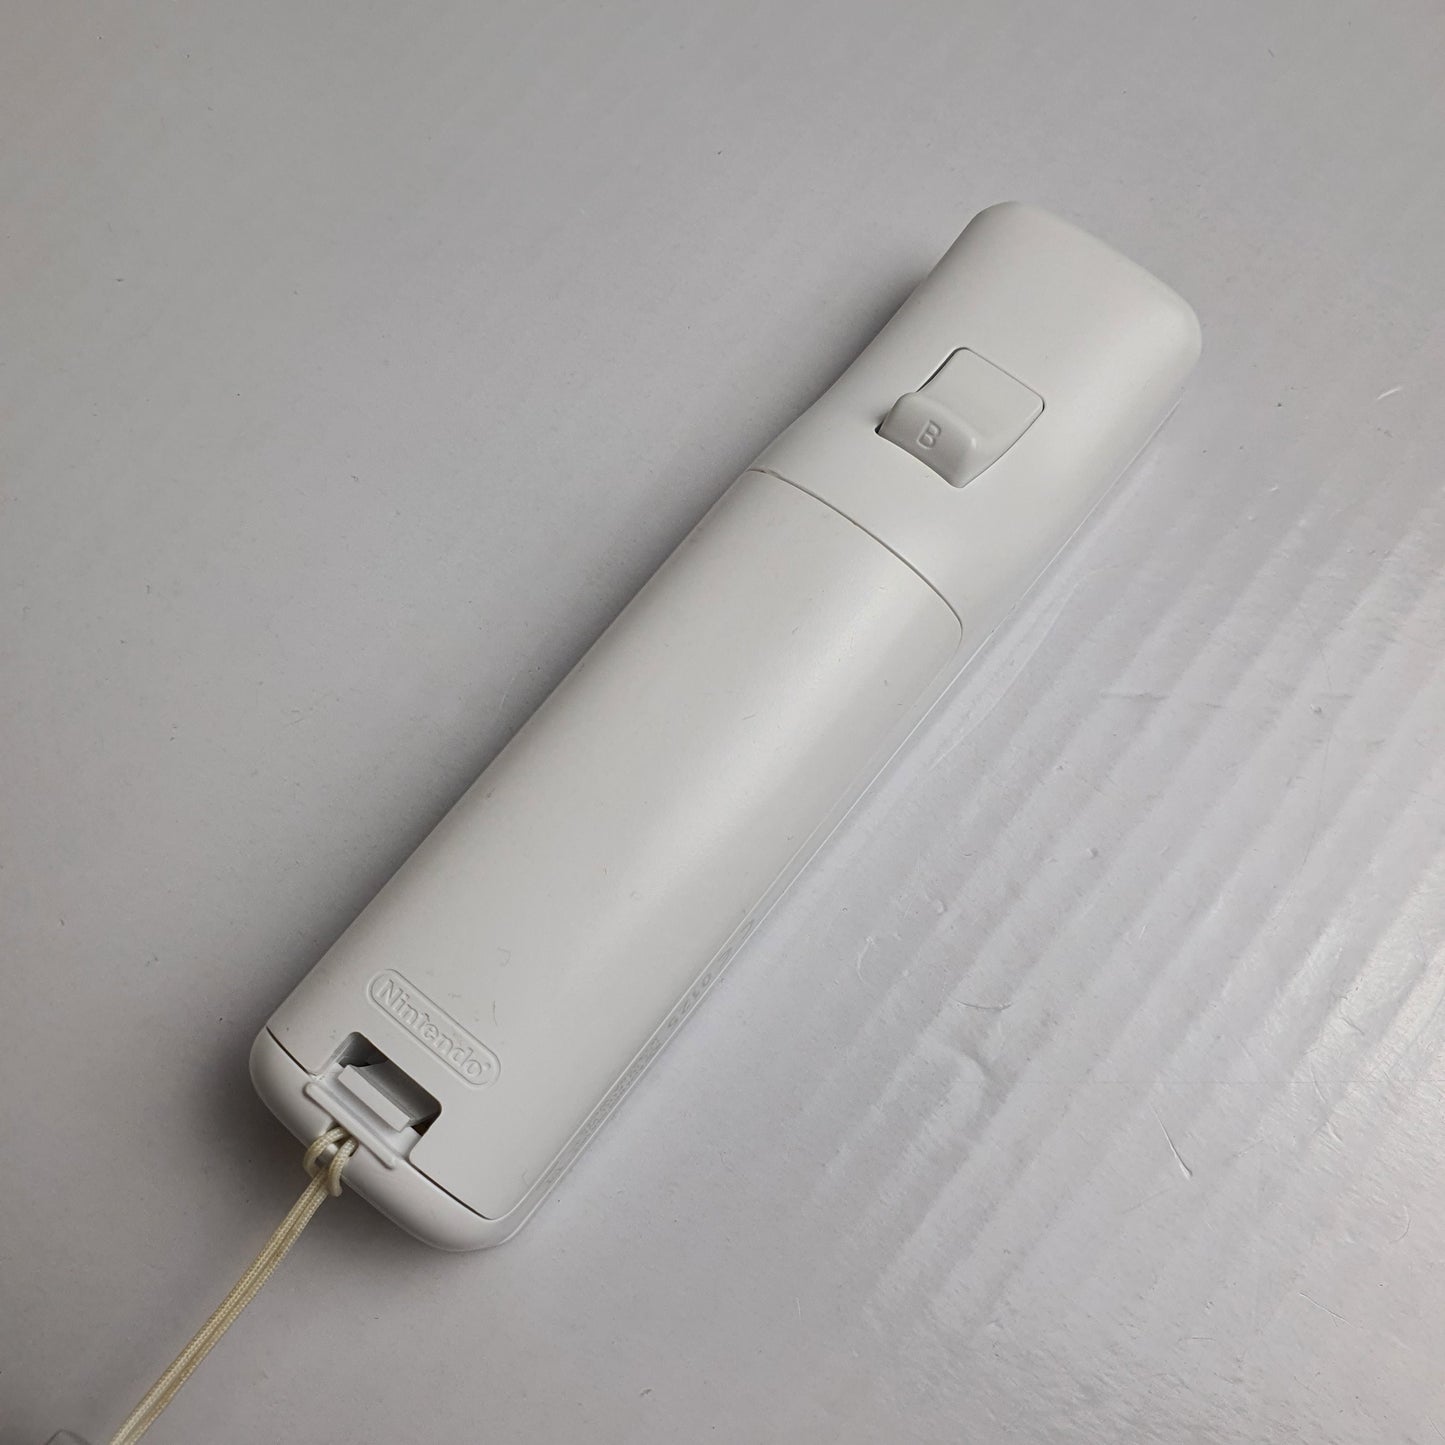 Official Nintendo Wii Wireless Remote